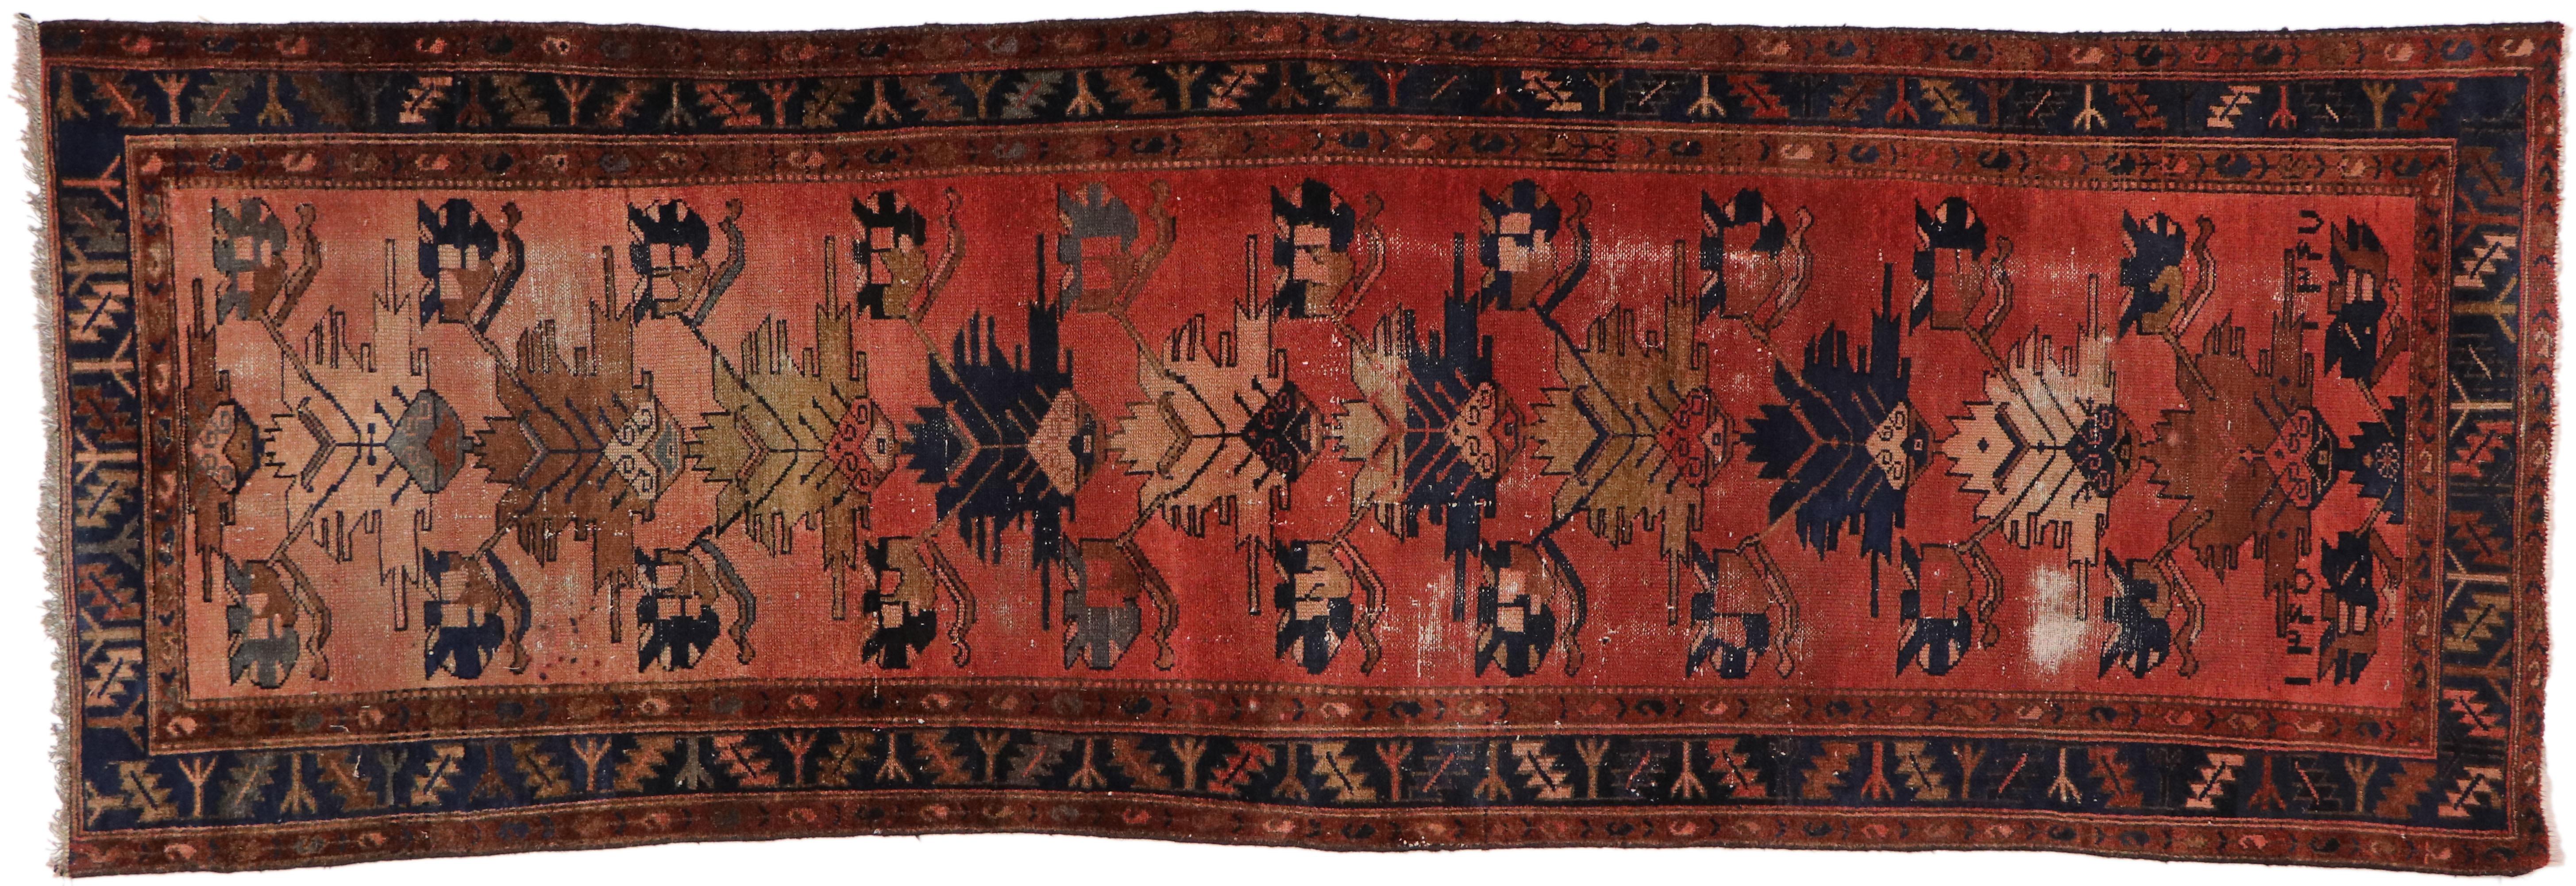 Distressed Antique Persian Hamadan Runner with Rustic English Manor Tudor Style For Sale 2